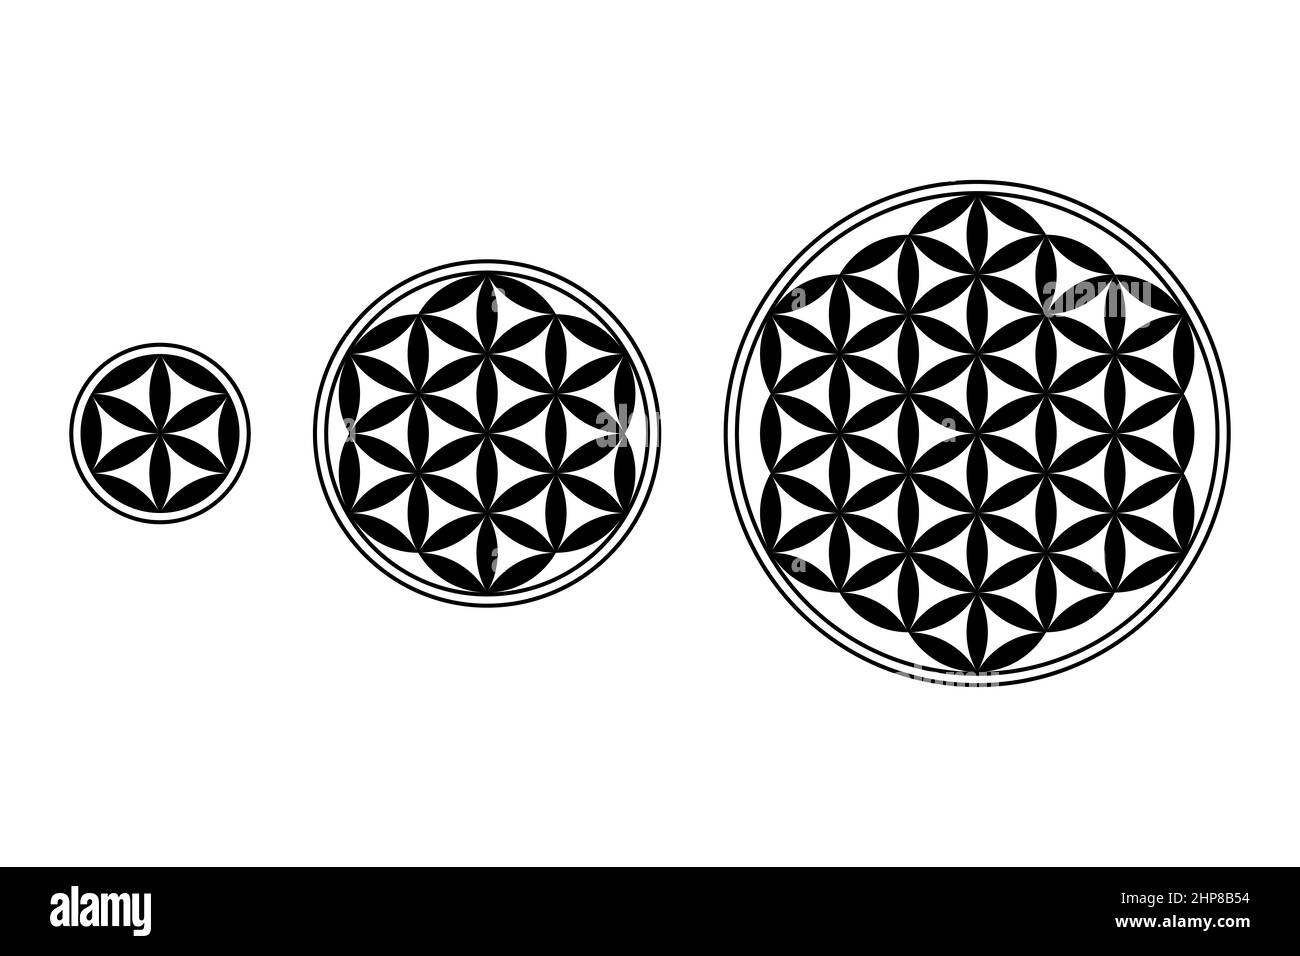 Flower of Life, Core and Seed of Life with black filled petals. Geometric figures and spiritual symbols of the Sacred Geometry. Stock Photo